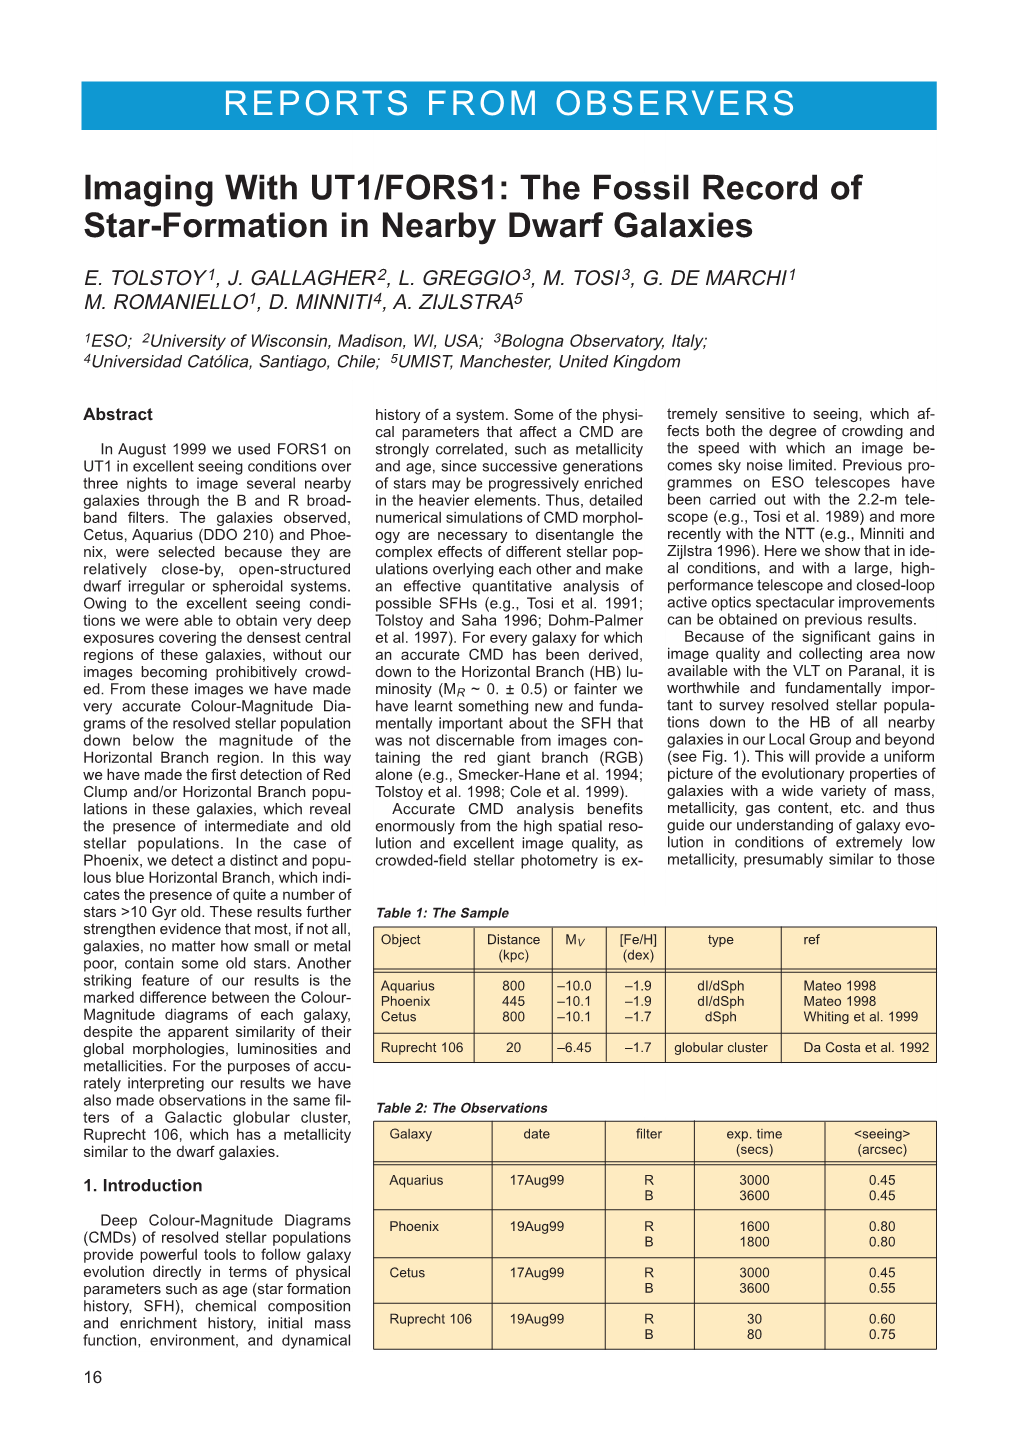 The Fossil Record of Star-Formation in Nearby Dwarf Galaxies